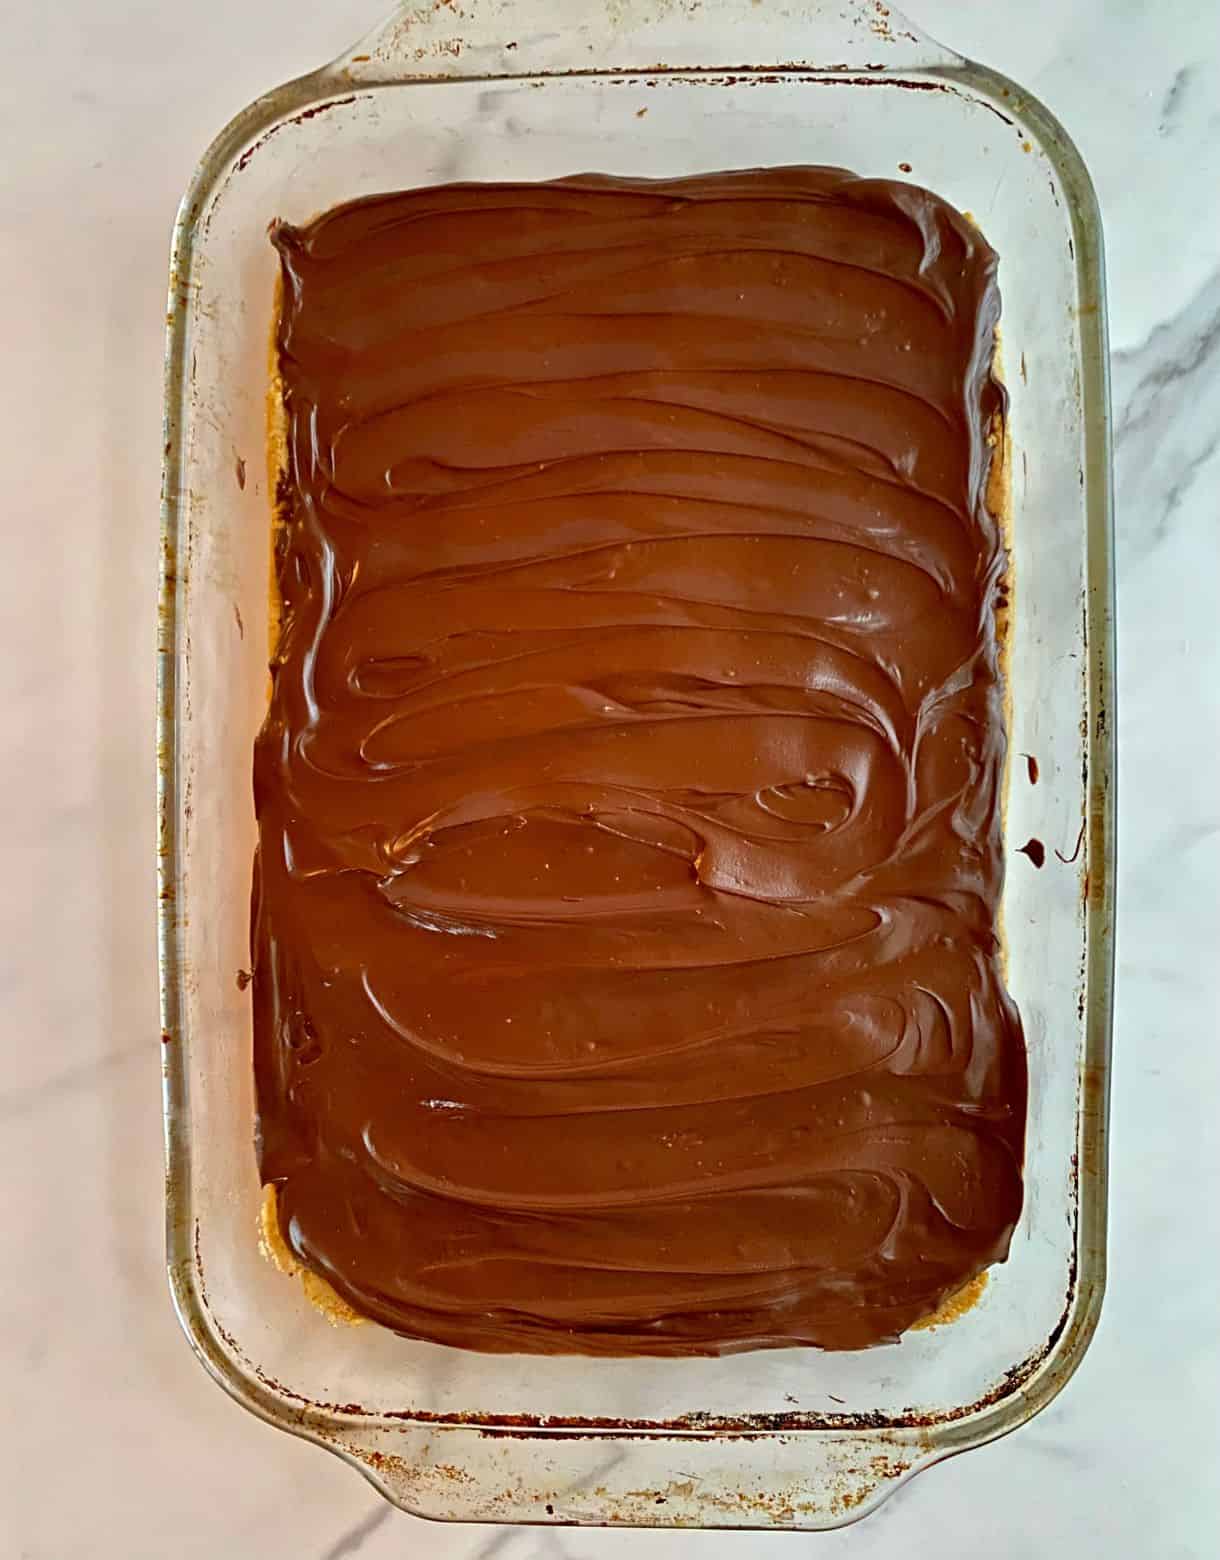 A pan of No-Bake Chocolate Peanut Butter Bars not cut up yet.